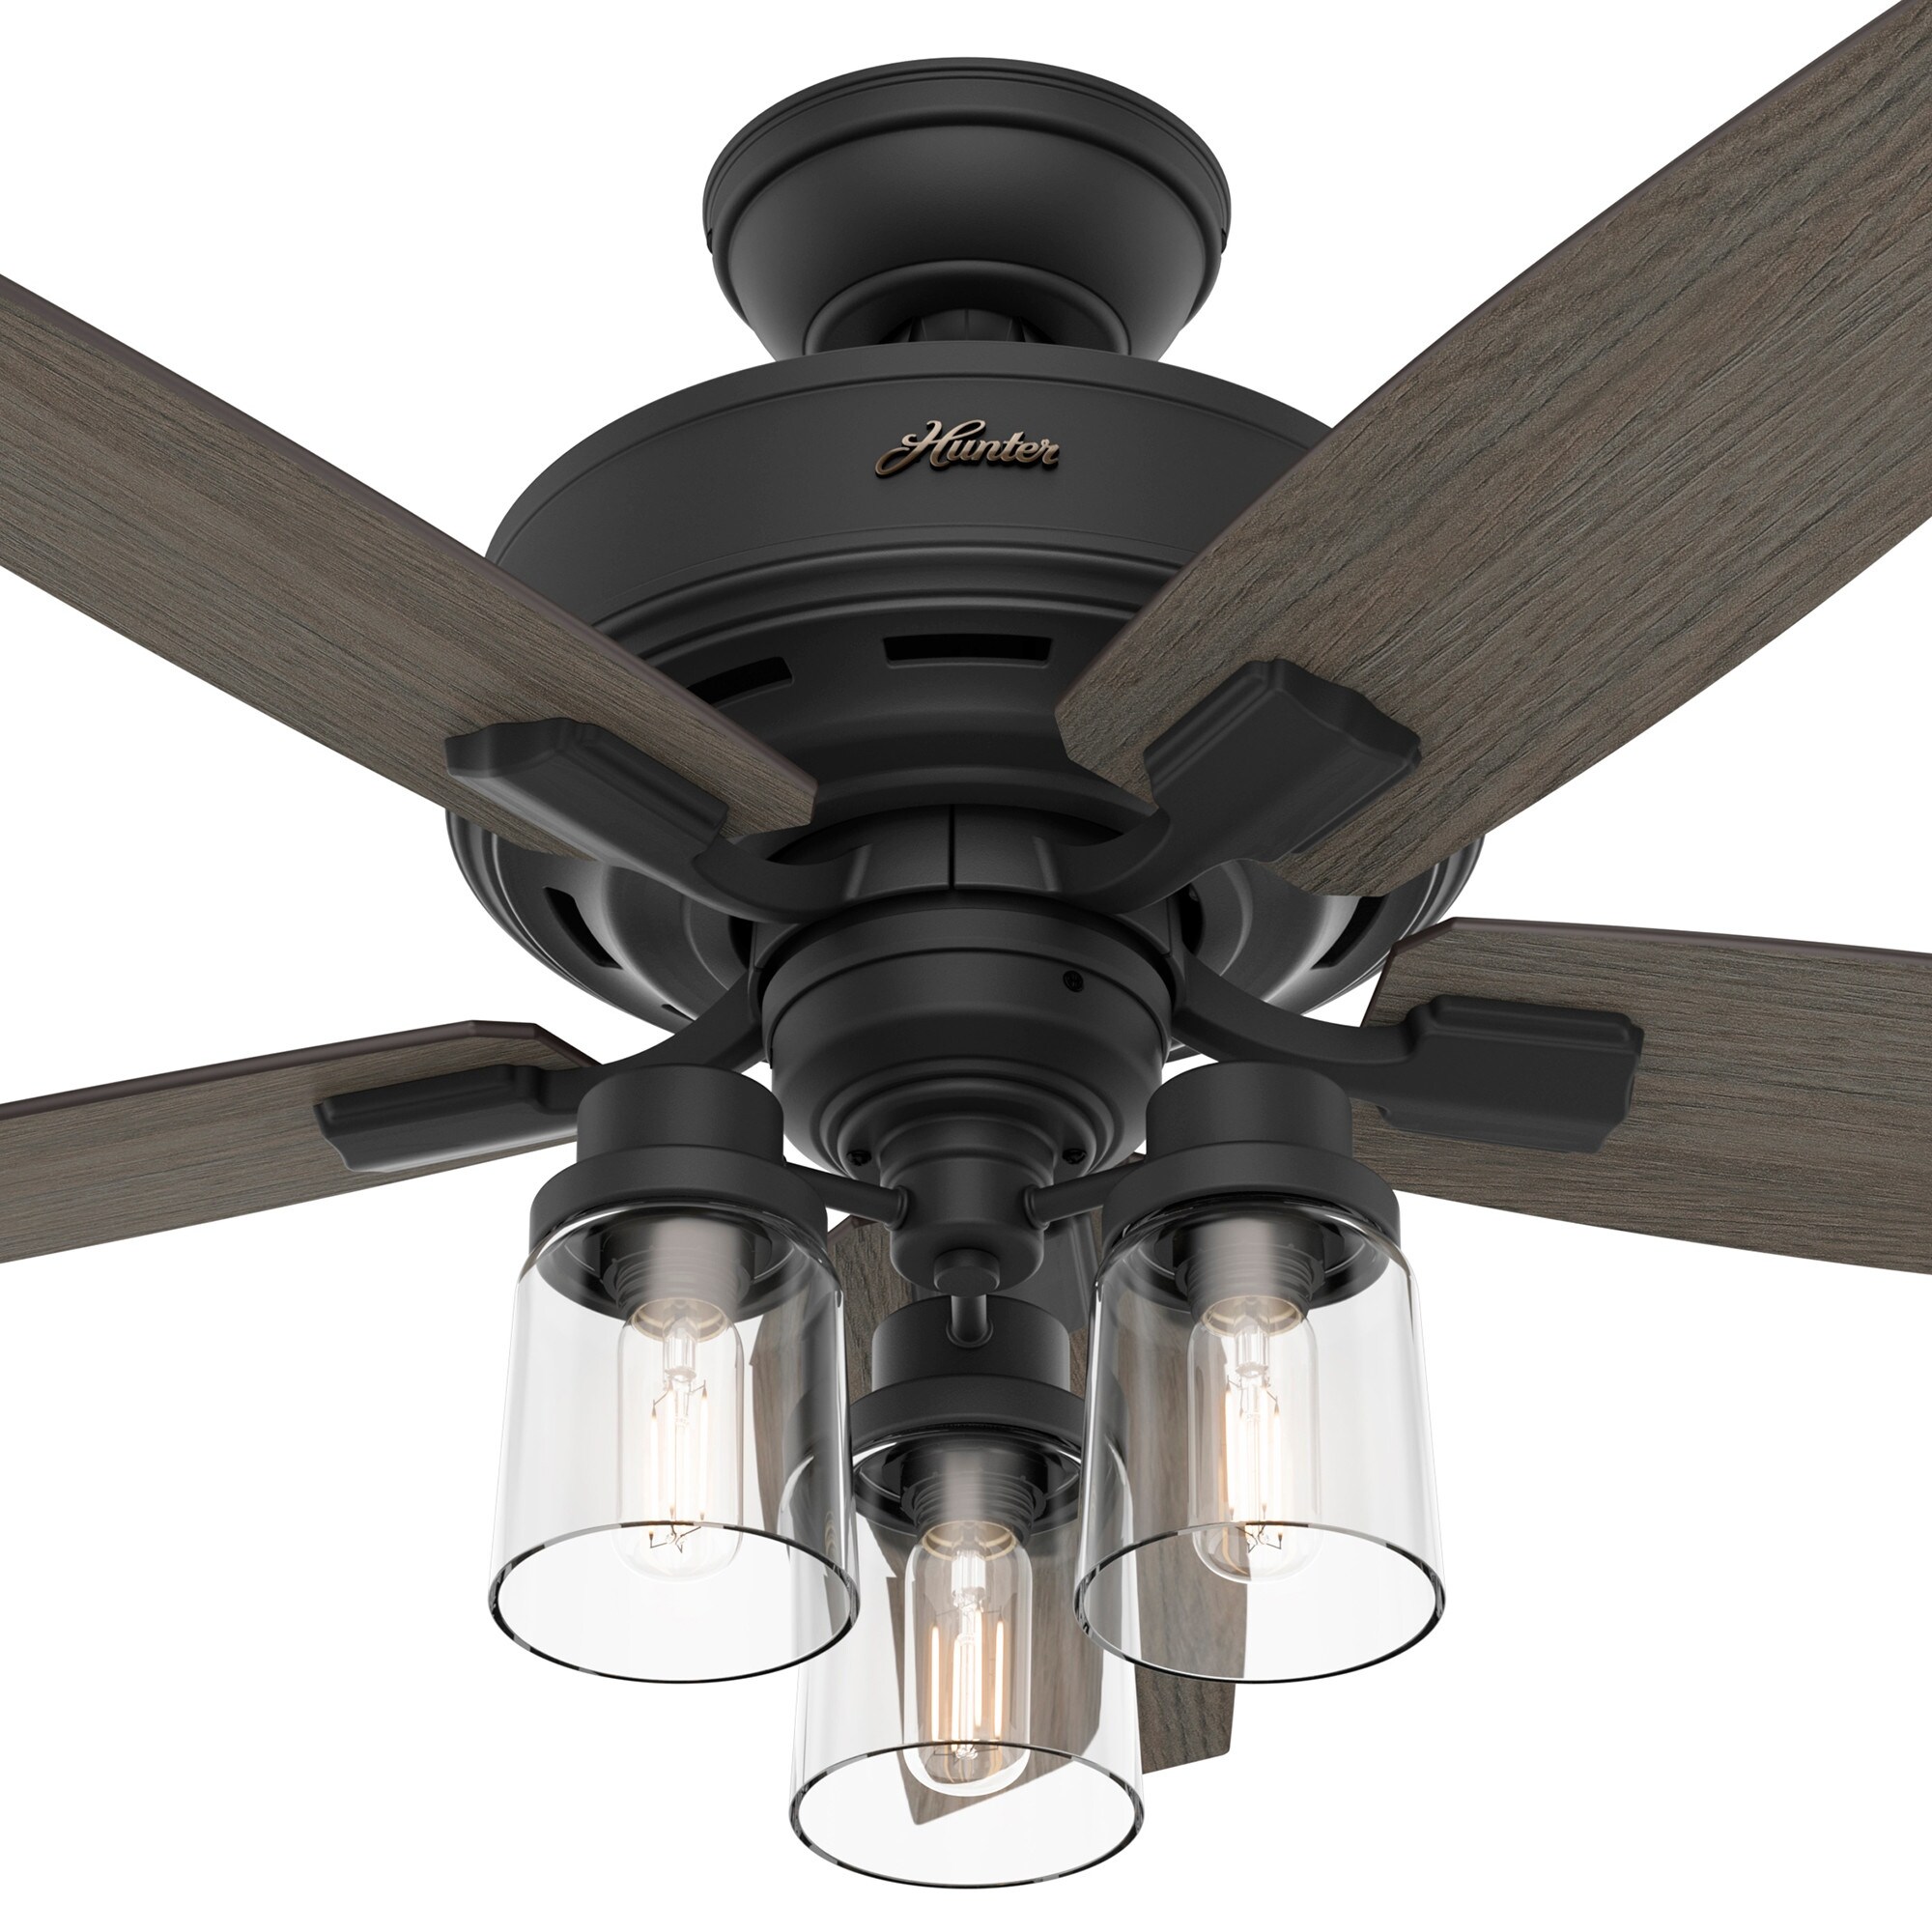 Hunter 44" Bennett Ceiling Fan with 3-Light LED Light and Handheld Remote - Transitional